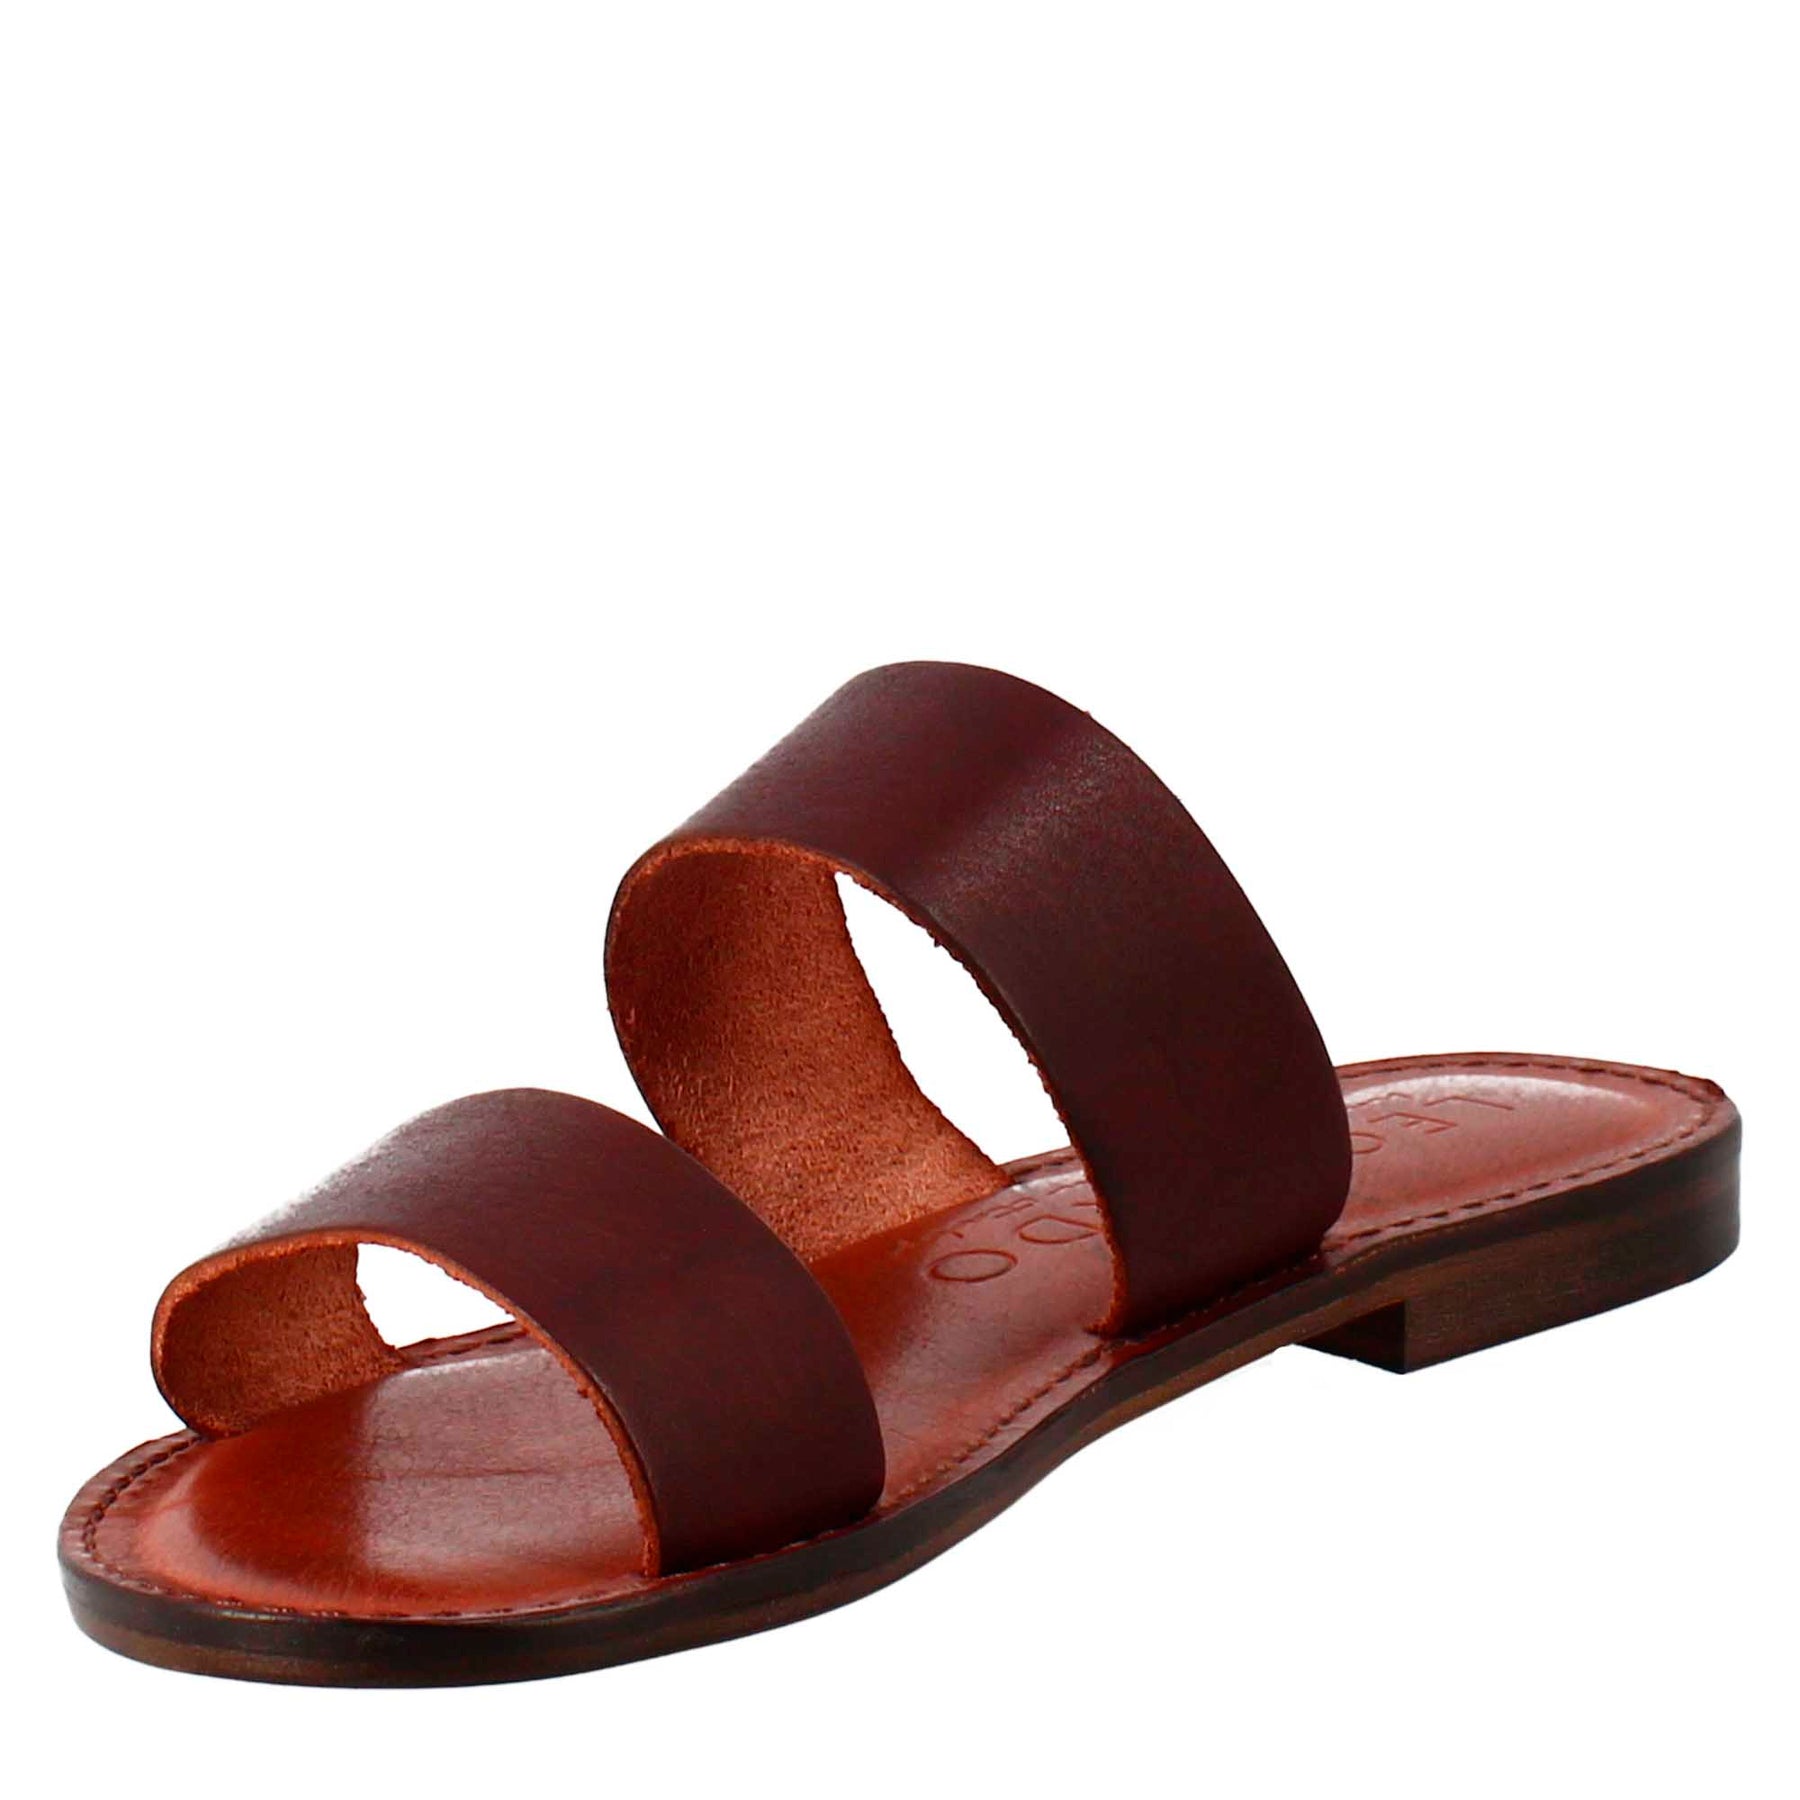 Ancient Roman style Nirvana women's sandals in brown leather 